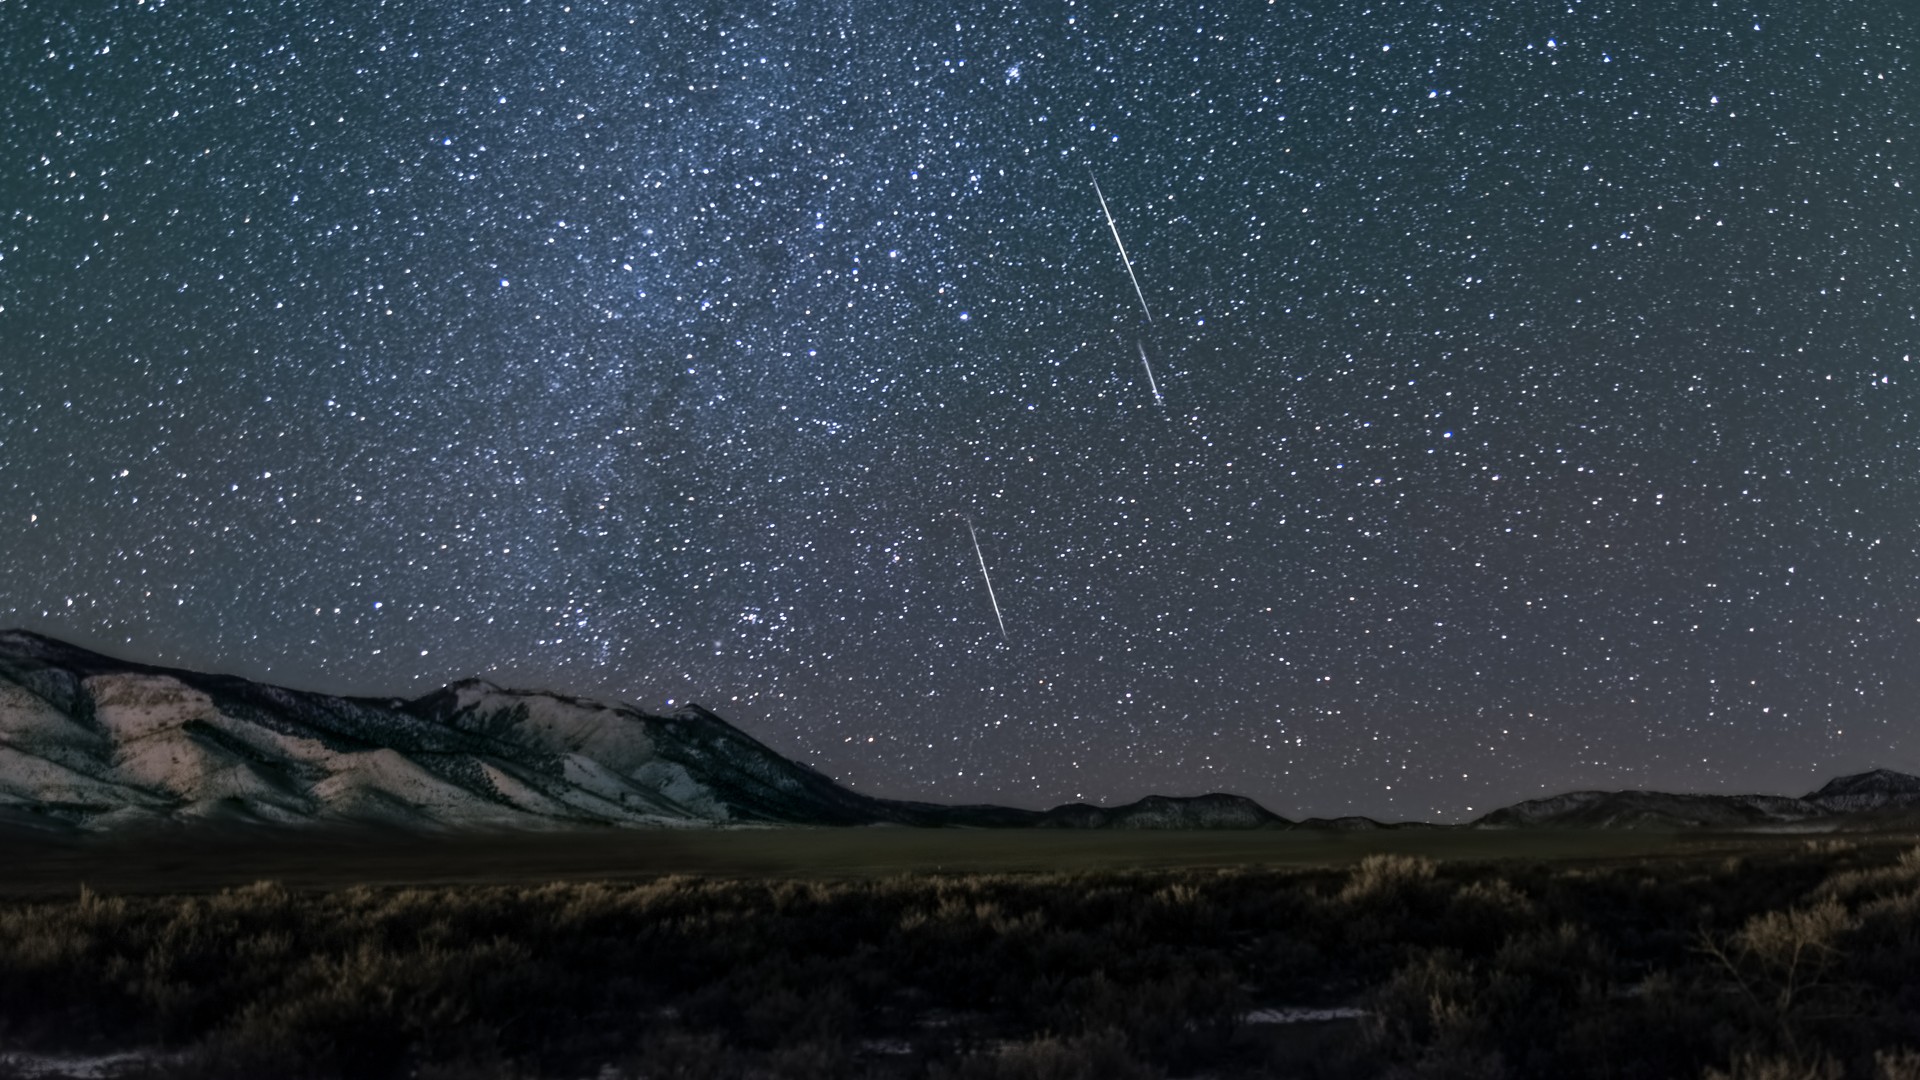 The Geminid meteor shower of 2023 peaks tonight. Here’s how to watch live online. Space